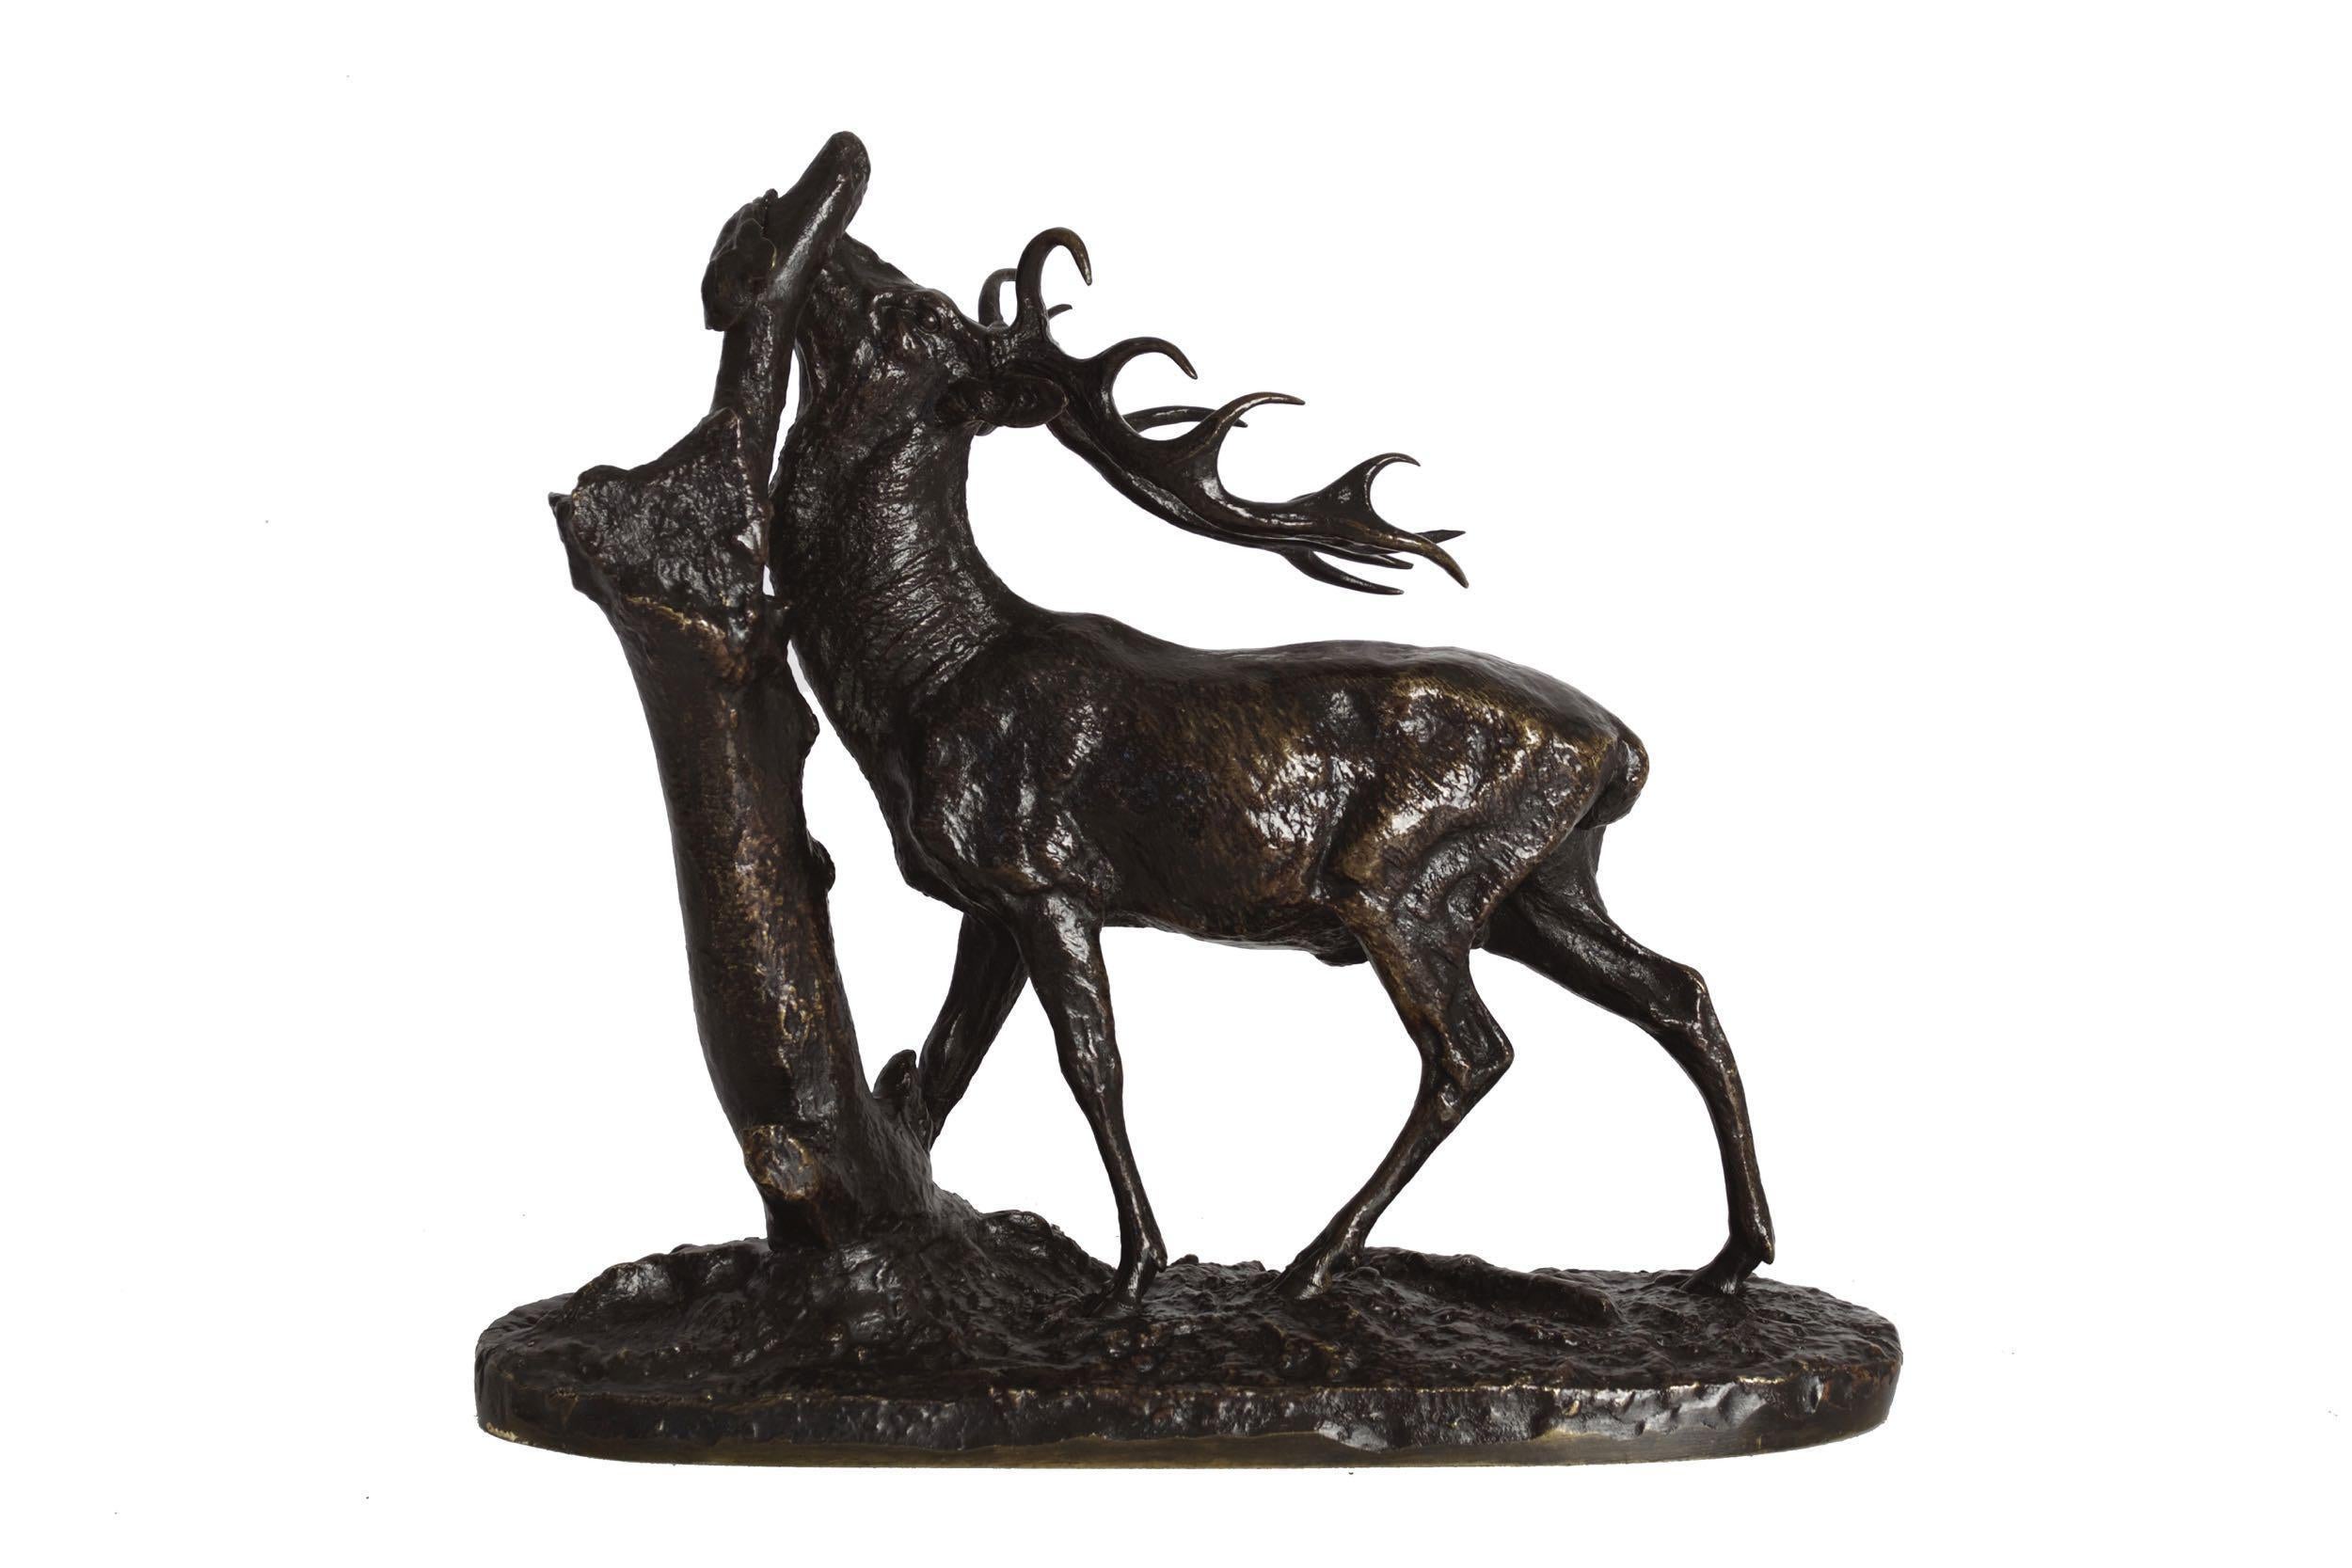 “Browsing Stag” 1843 Antique French Bronze Sculpture by Pierre Jules Mene In Good Condition For Sale In Shippensburg, PA